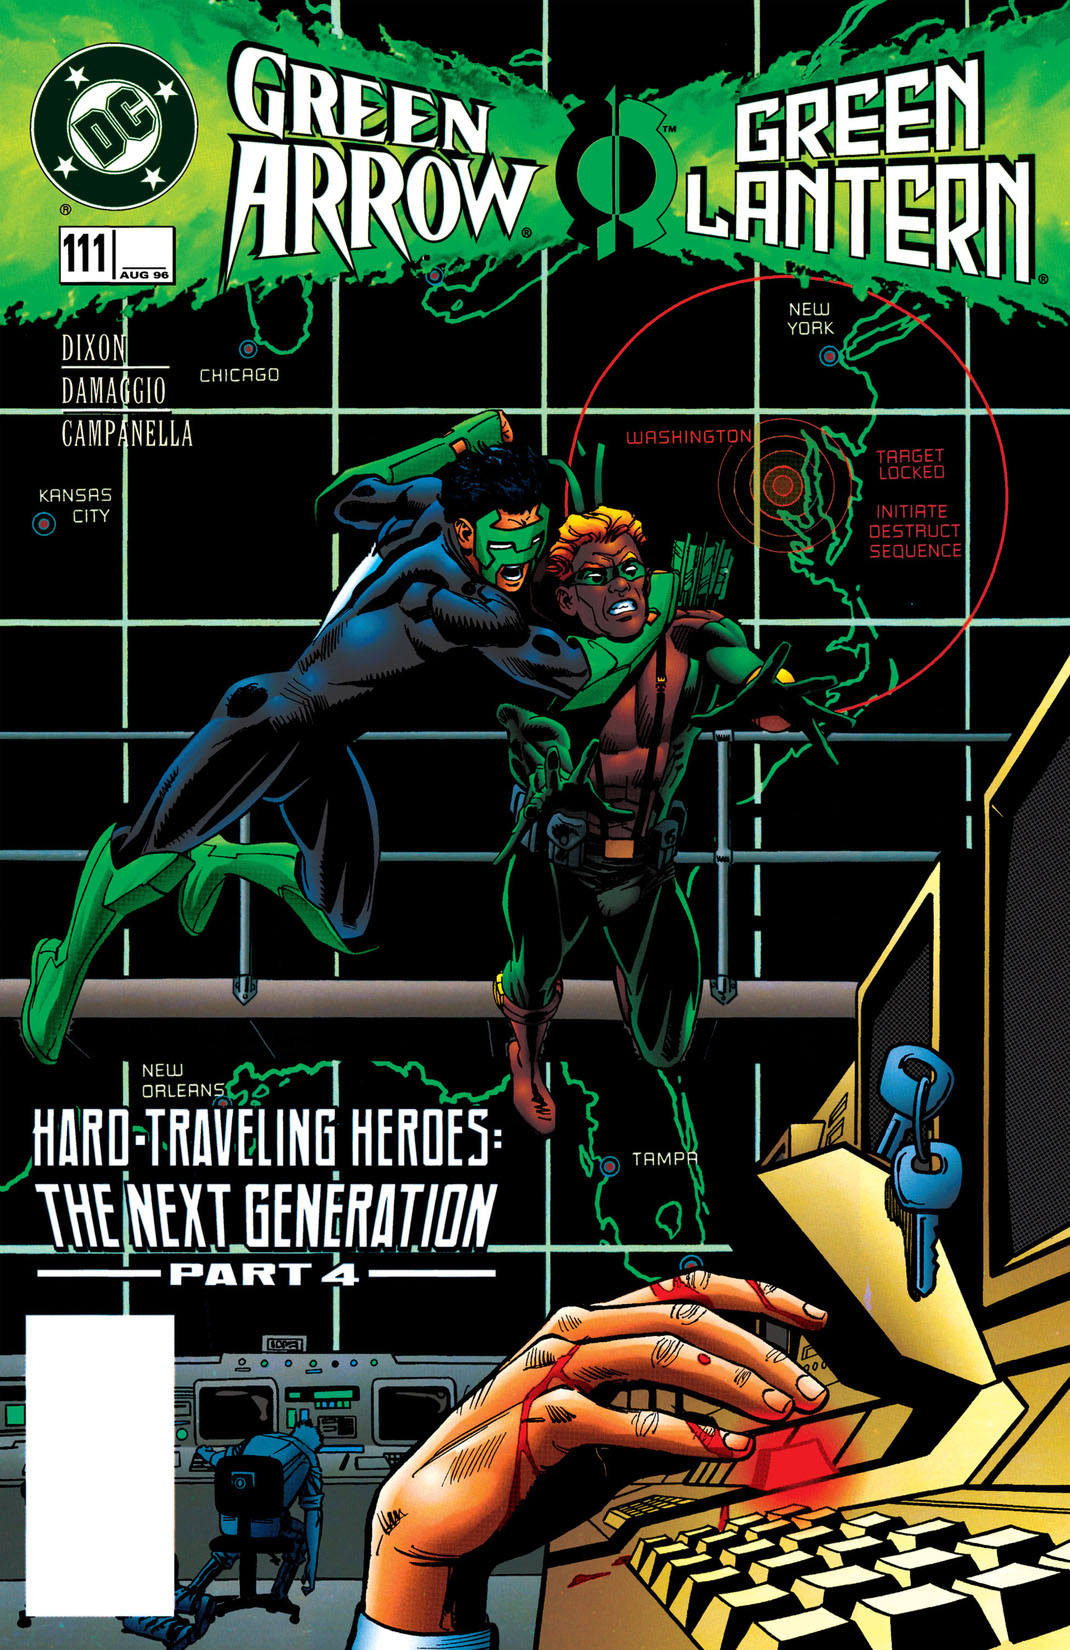 Green Arrow (1987-) #111 preview images